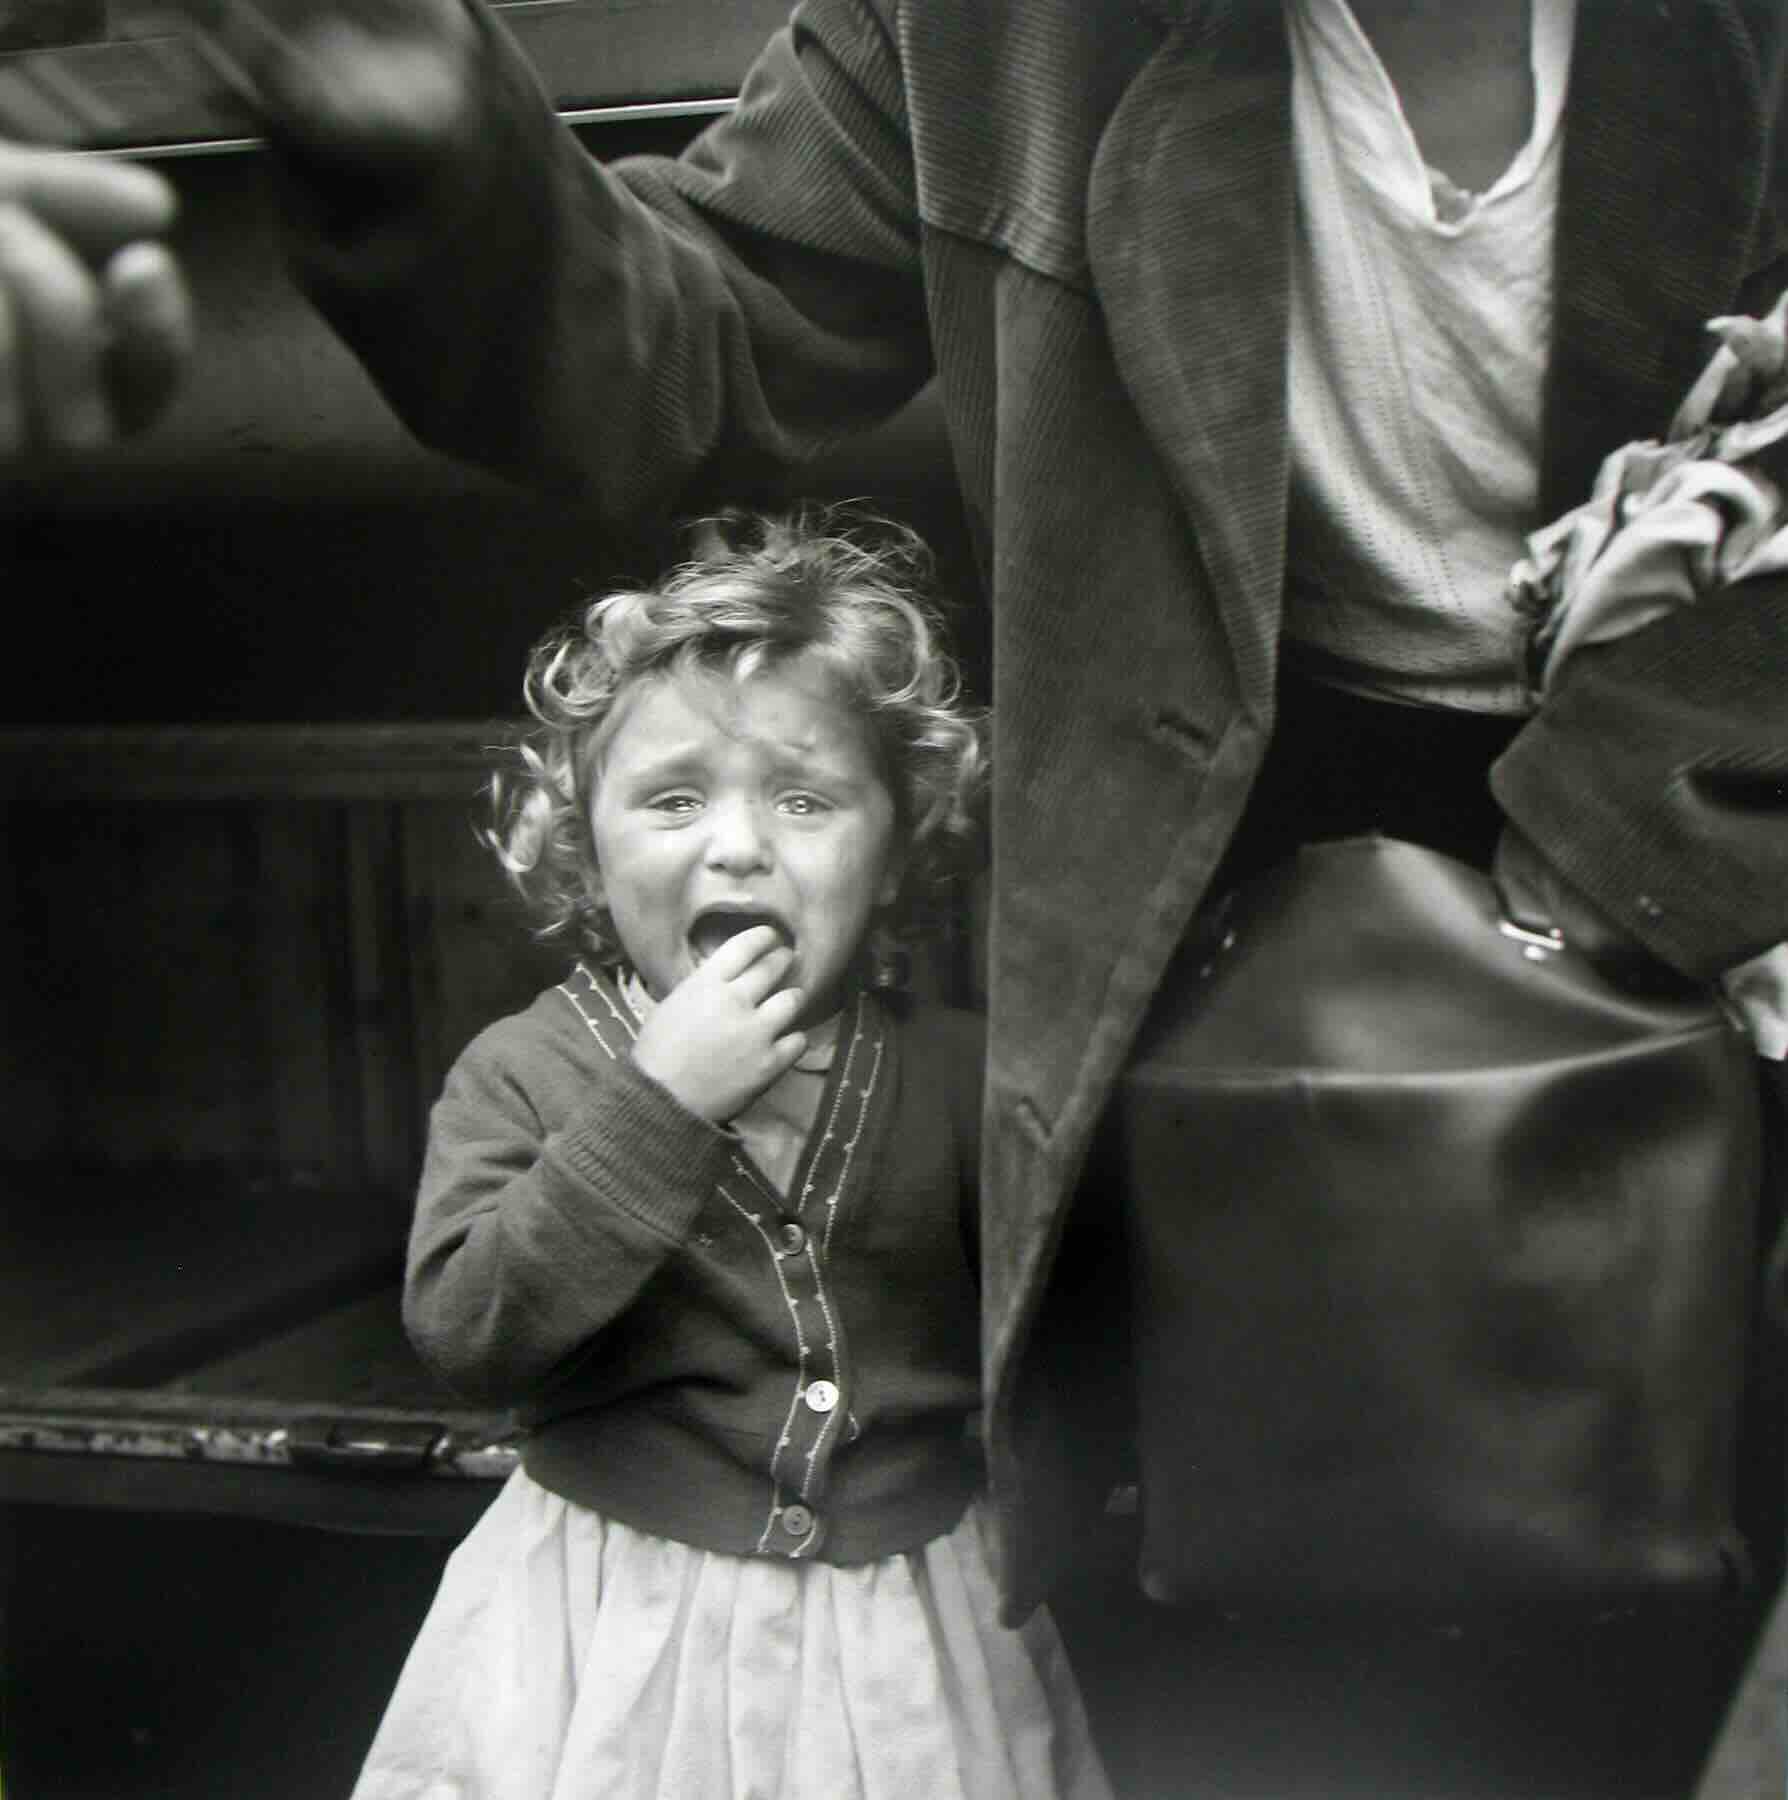 ©Estate of Vivian Maier, Courtesy of Maloof Collection and Howard Greenberg Gallery, NY